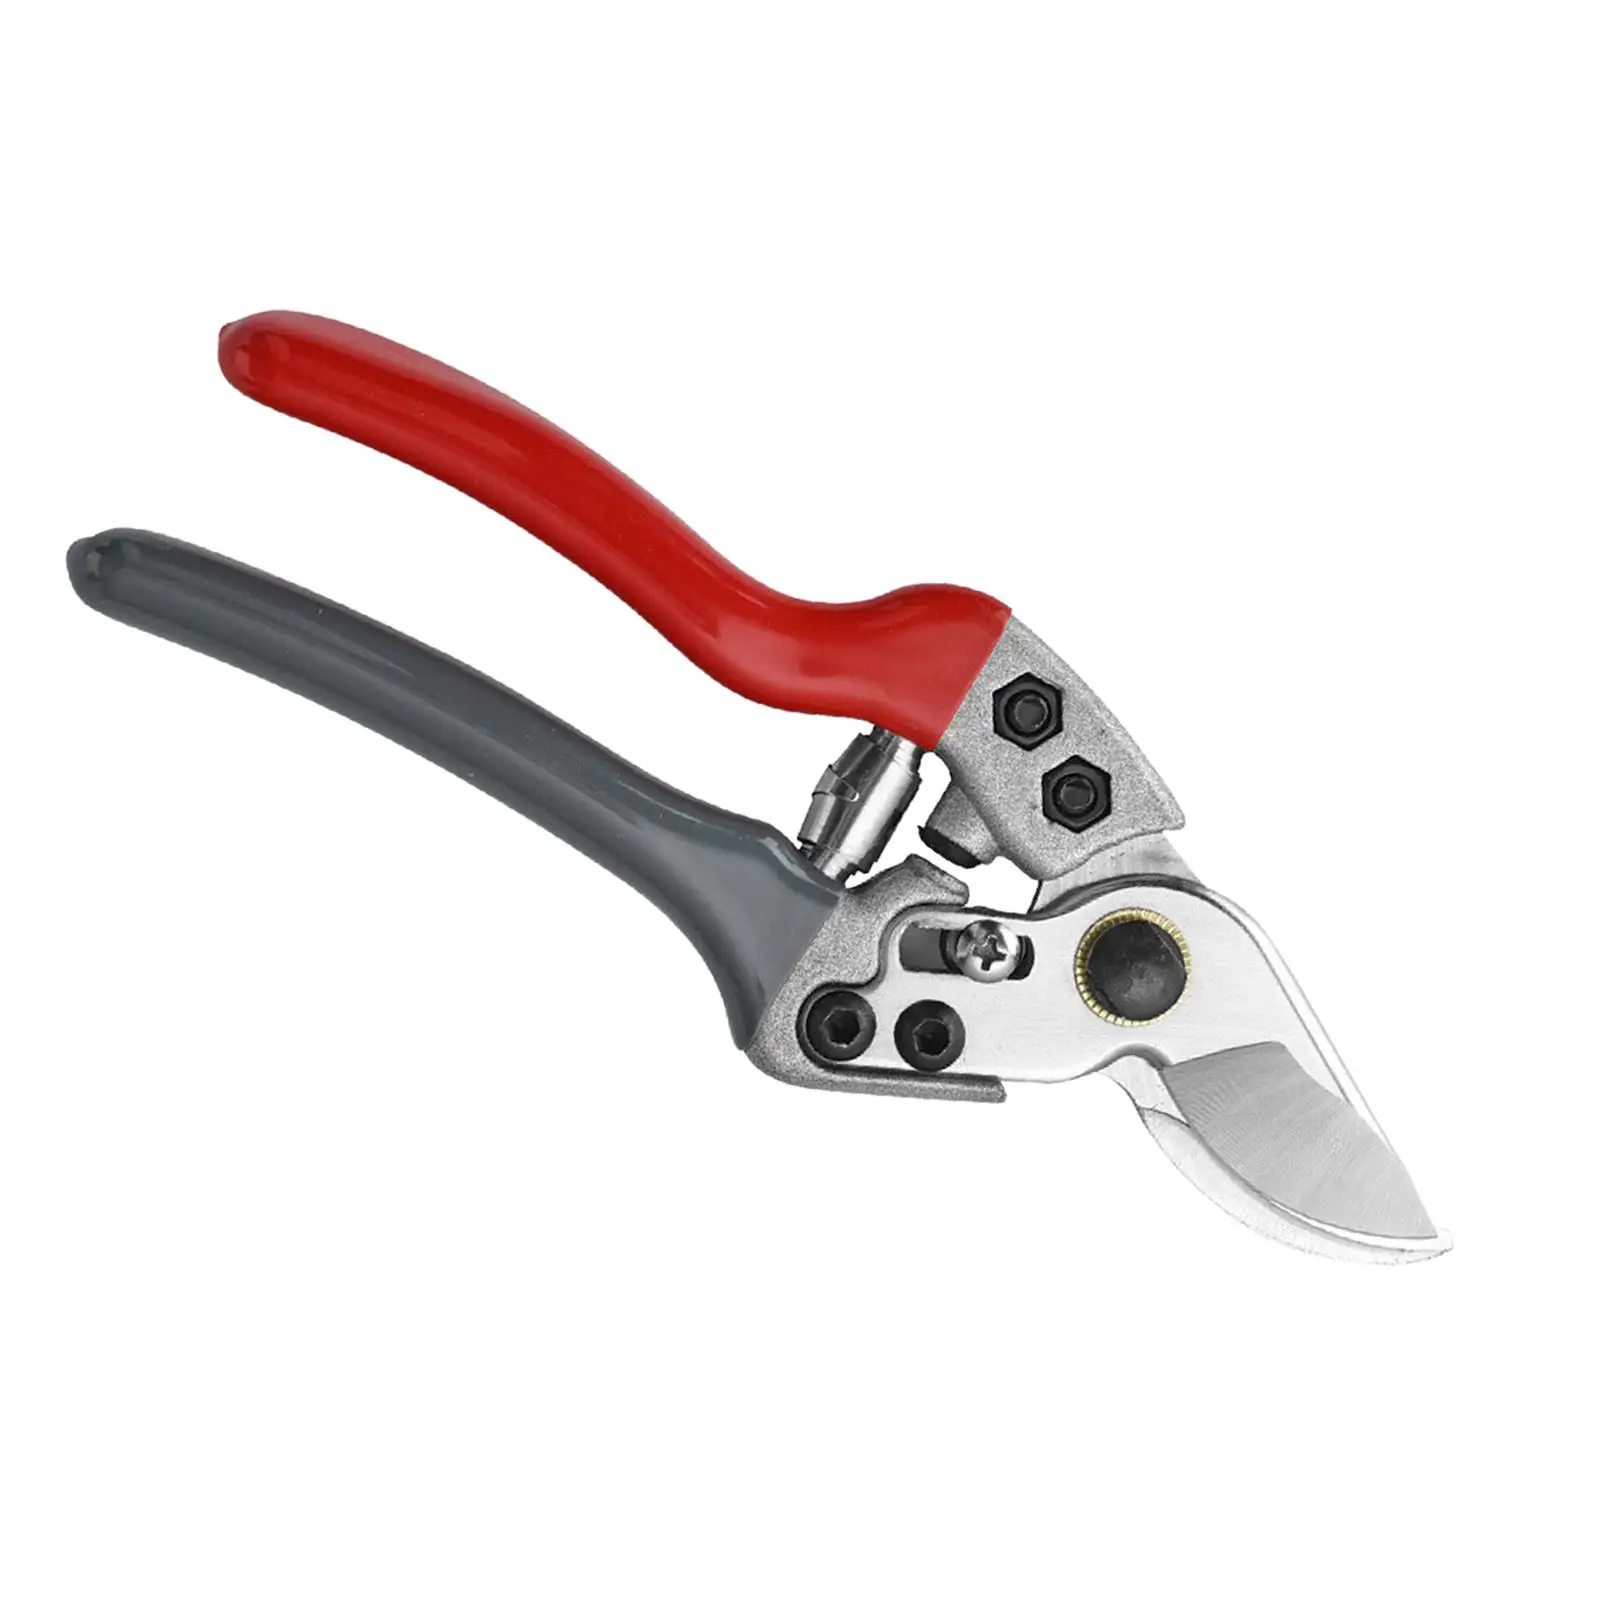 Pruning shear Rose Flower Hedge Cutter Gardening Tools Hand Pruners Garden Clippers for Flowers Orchard Bonsai Branches Bushes